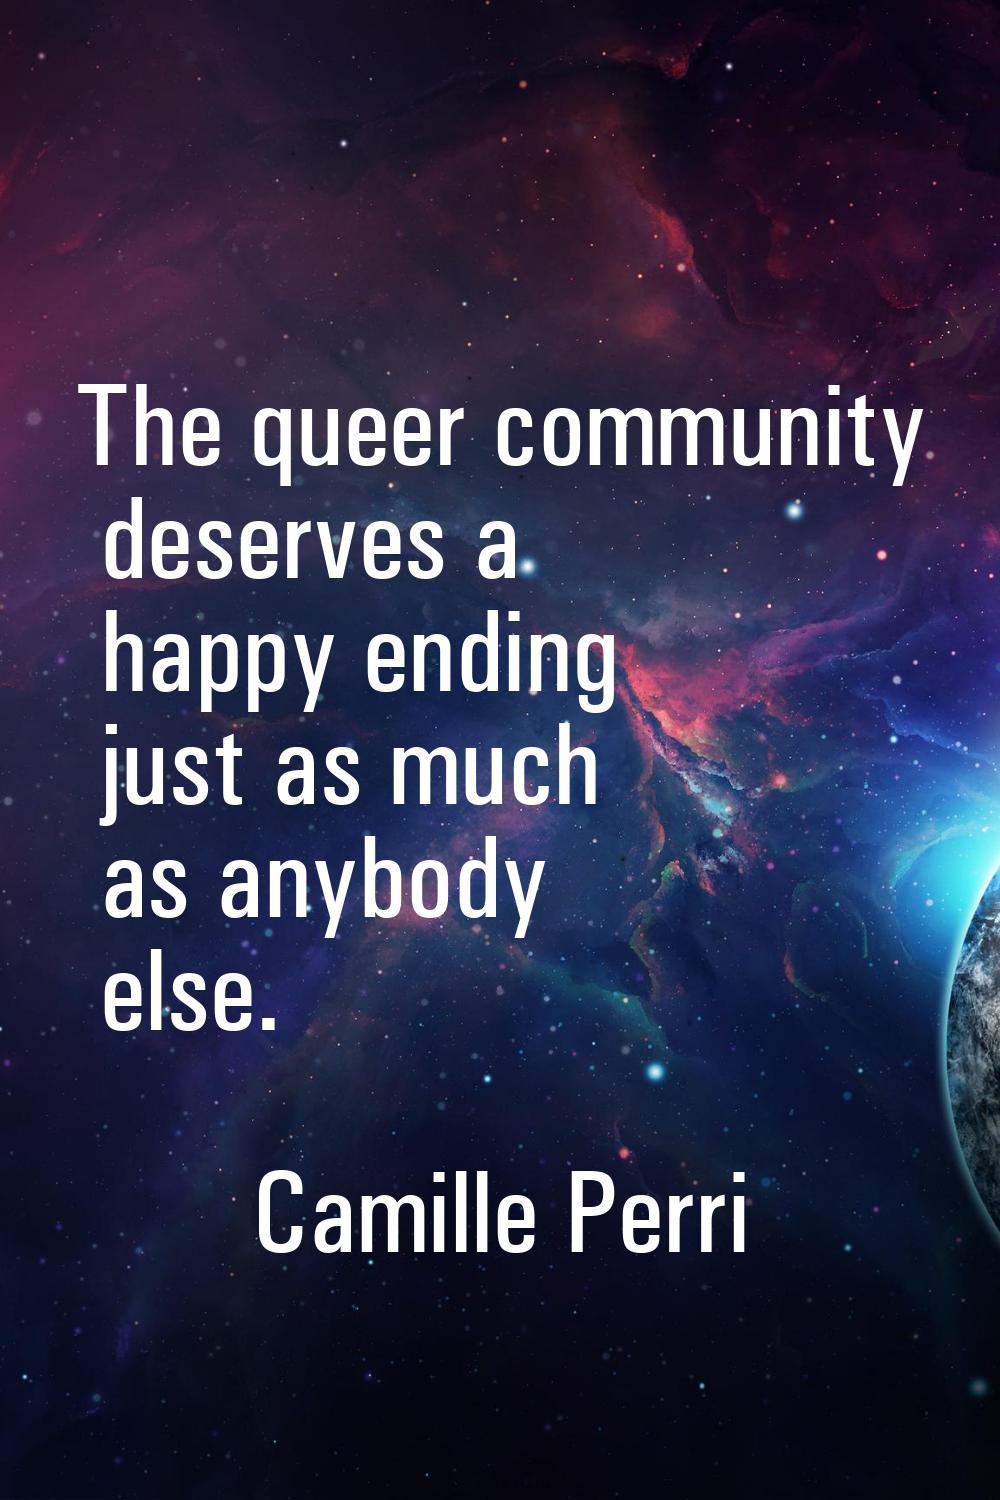 The queer community deserves a happy ending just as much as anybody else.